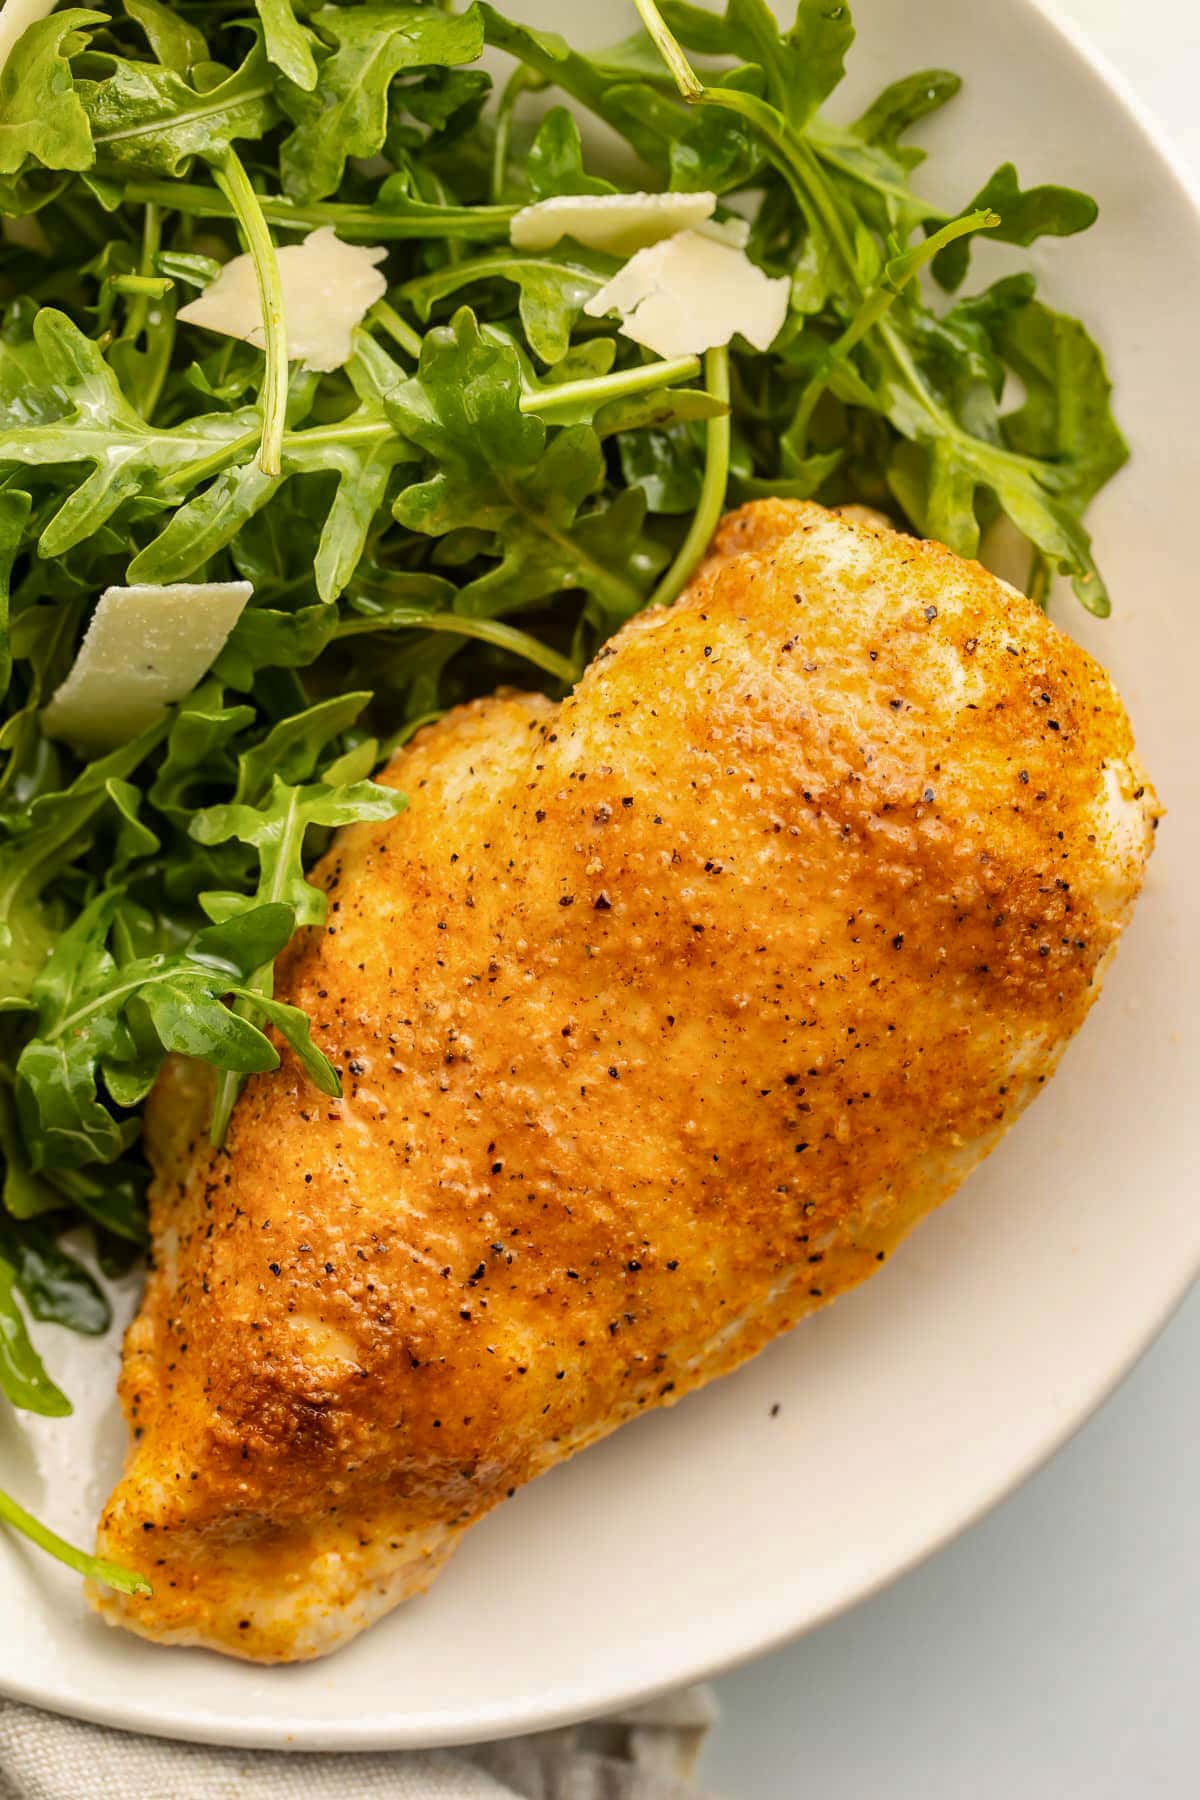 A chicken breast, cooked in the Instant Pot, on a neutral plate with a small side salad.